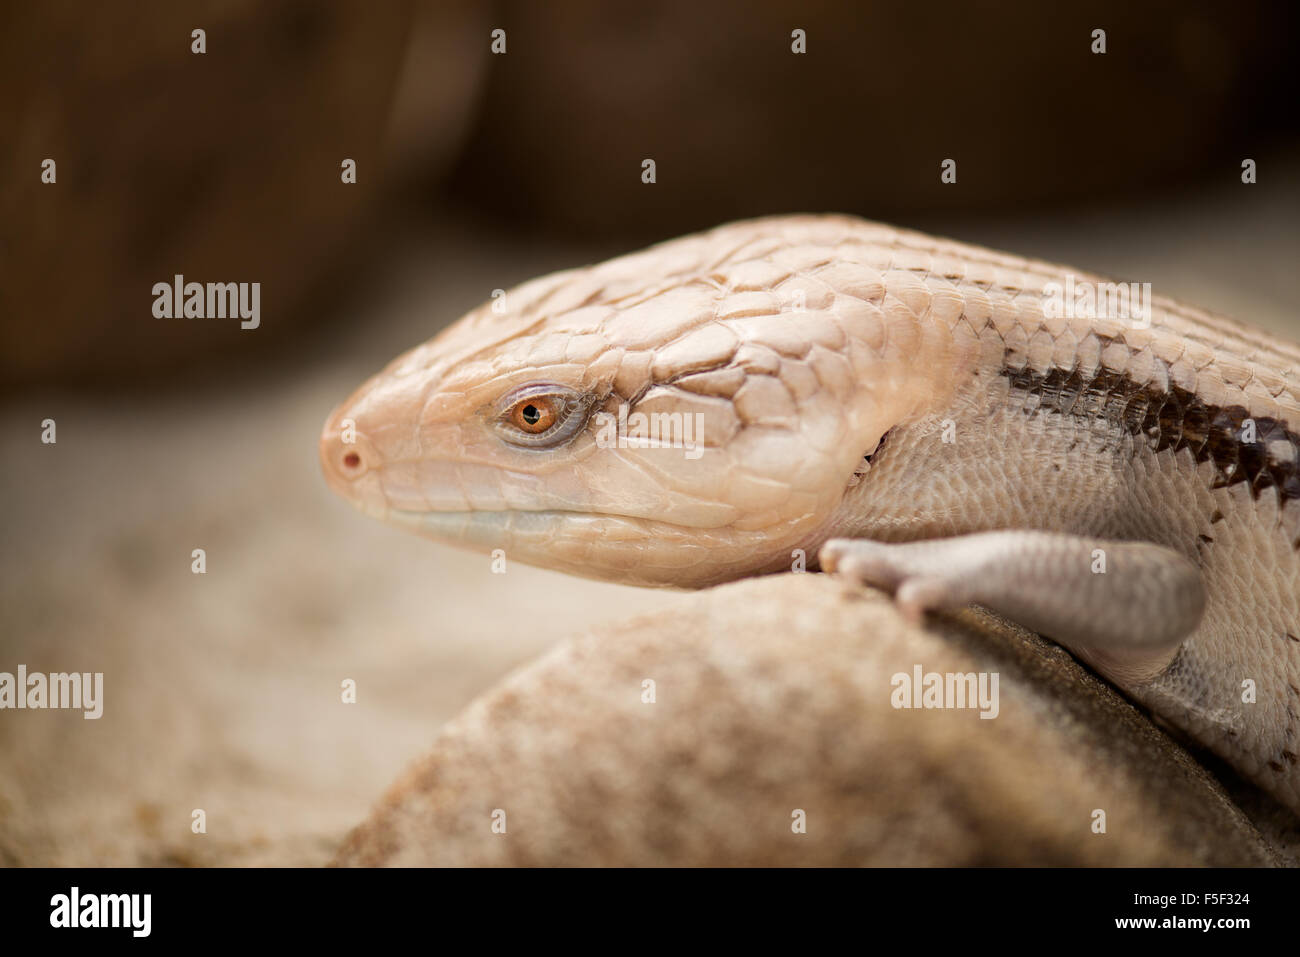 A blue tongued skink suns itself on a rock for warmth Stock Photo